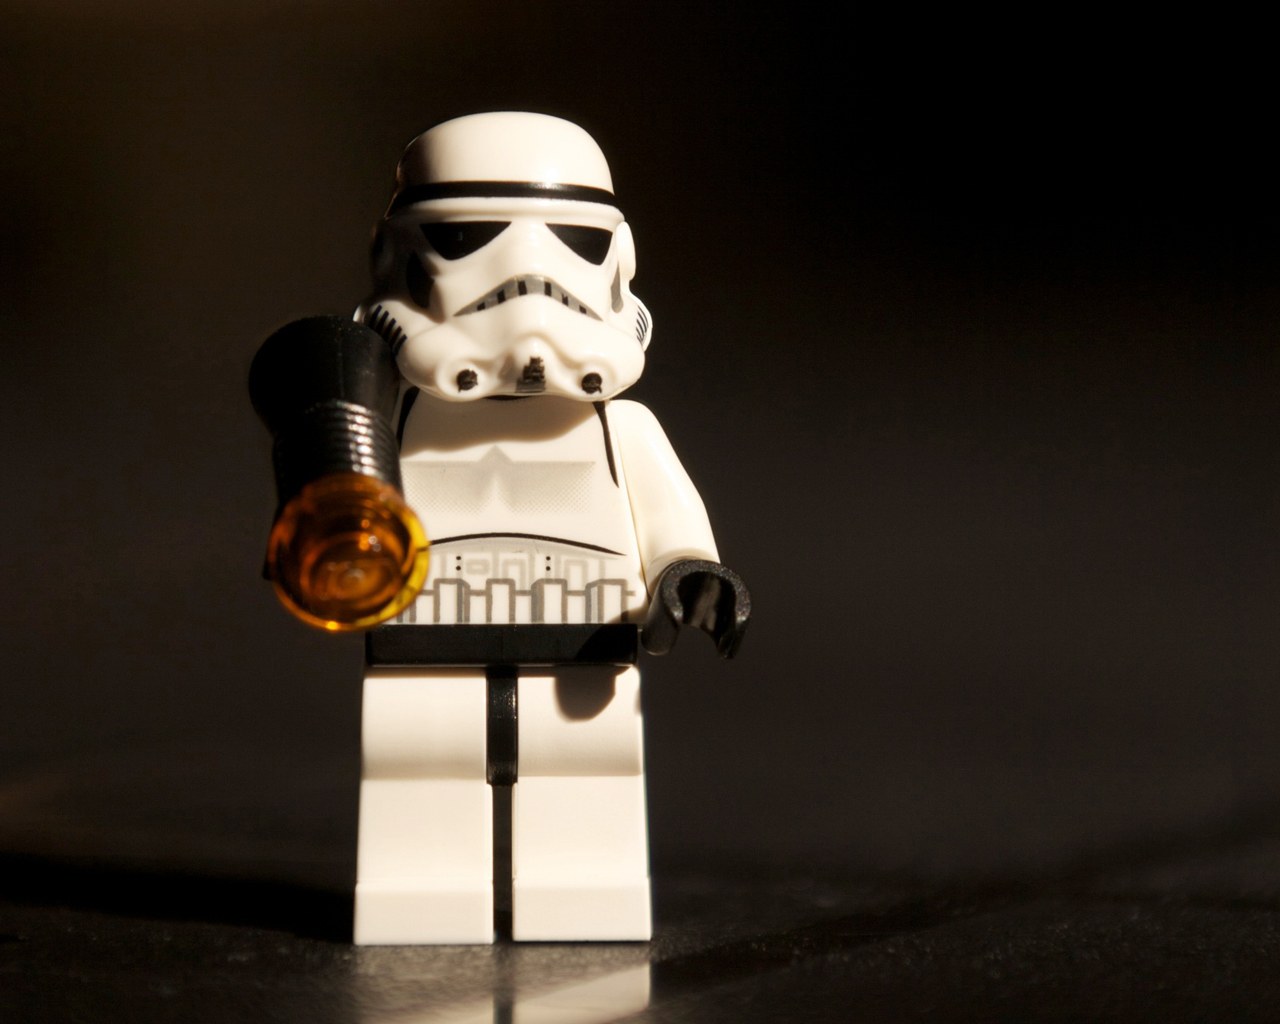  LEGO Wallpapers of Funny Lego Star War s and Toys